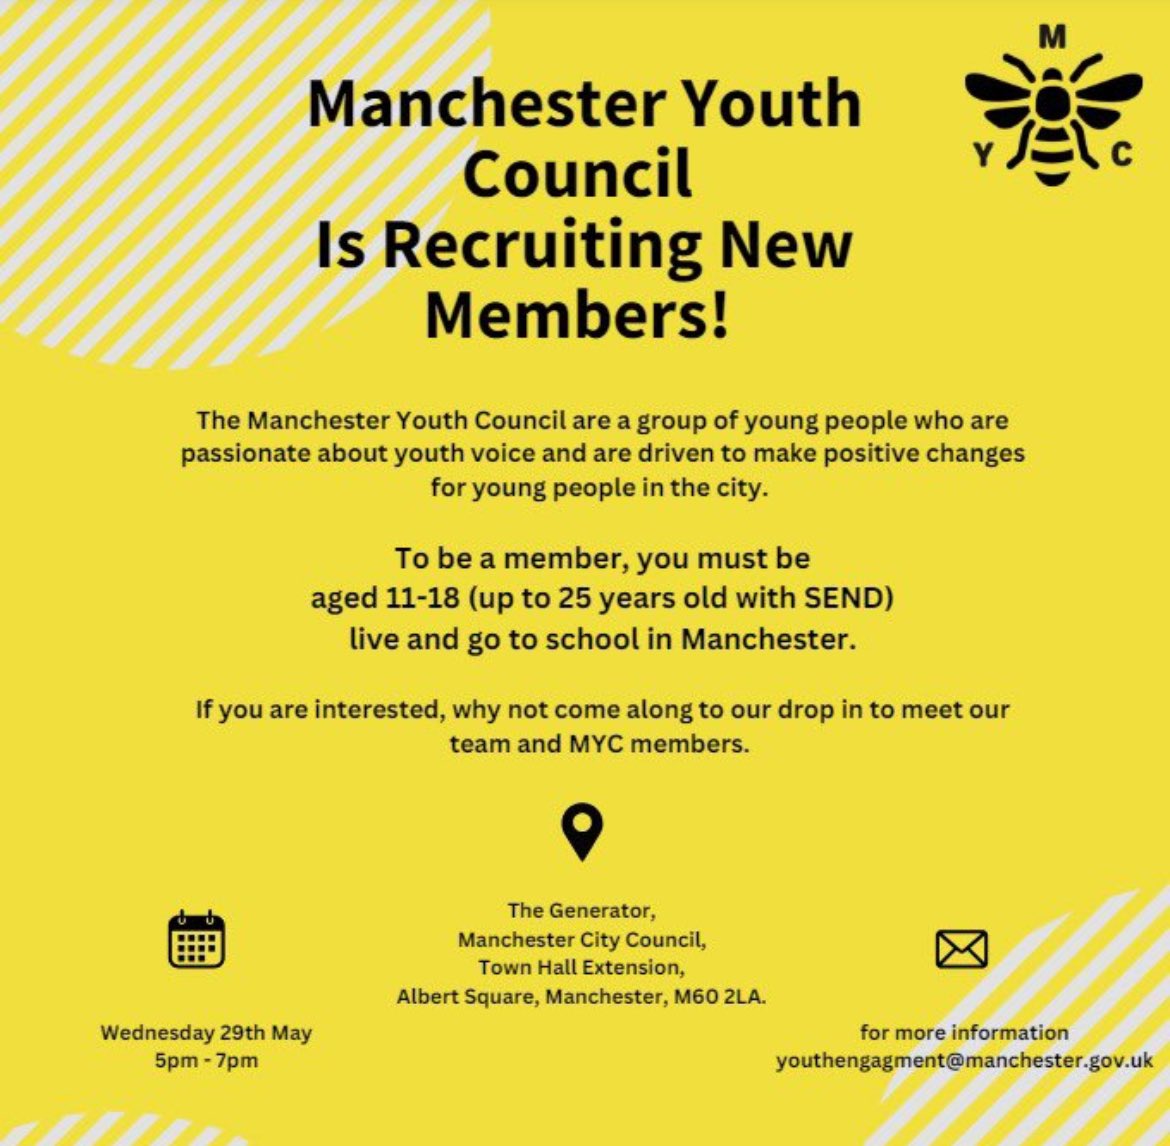 We are recruiting new members for Manchester Youth Council. If you have always been curious about what we do why not come along to our drop in session next week! Please share! #Childfriendlycitymcr #Article13 #Article15